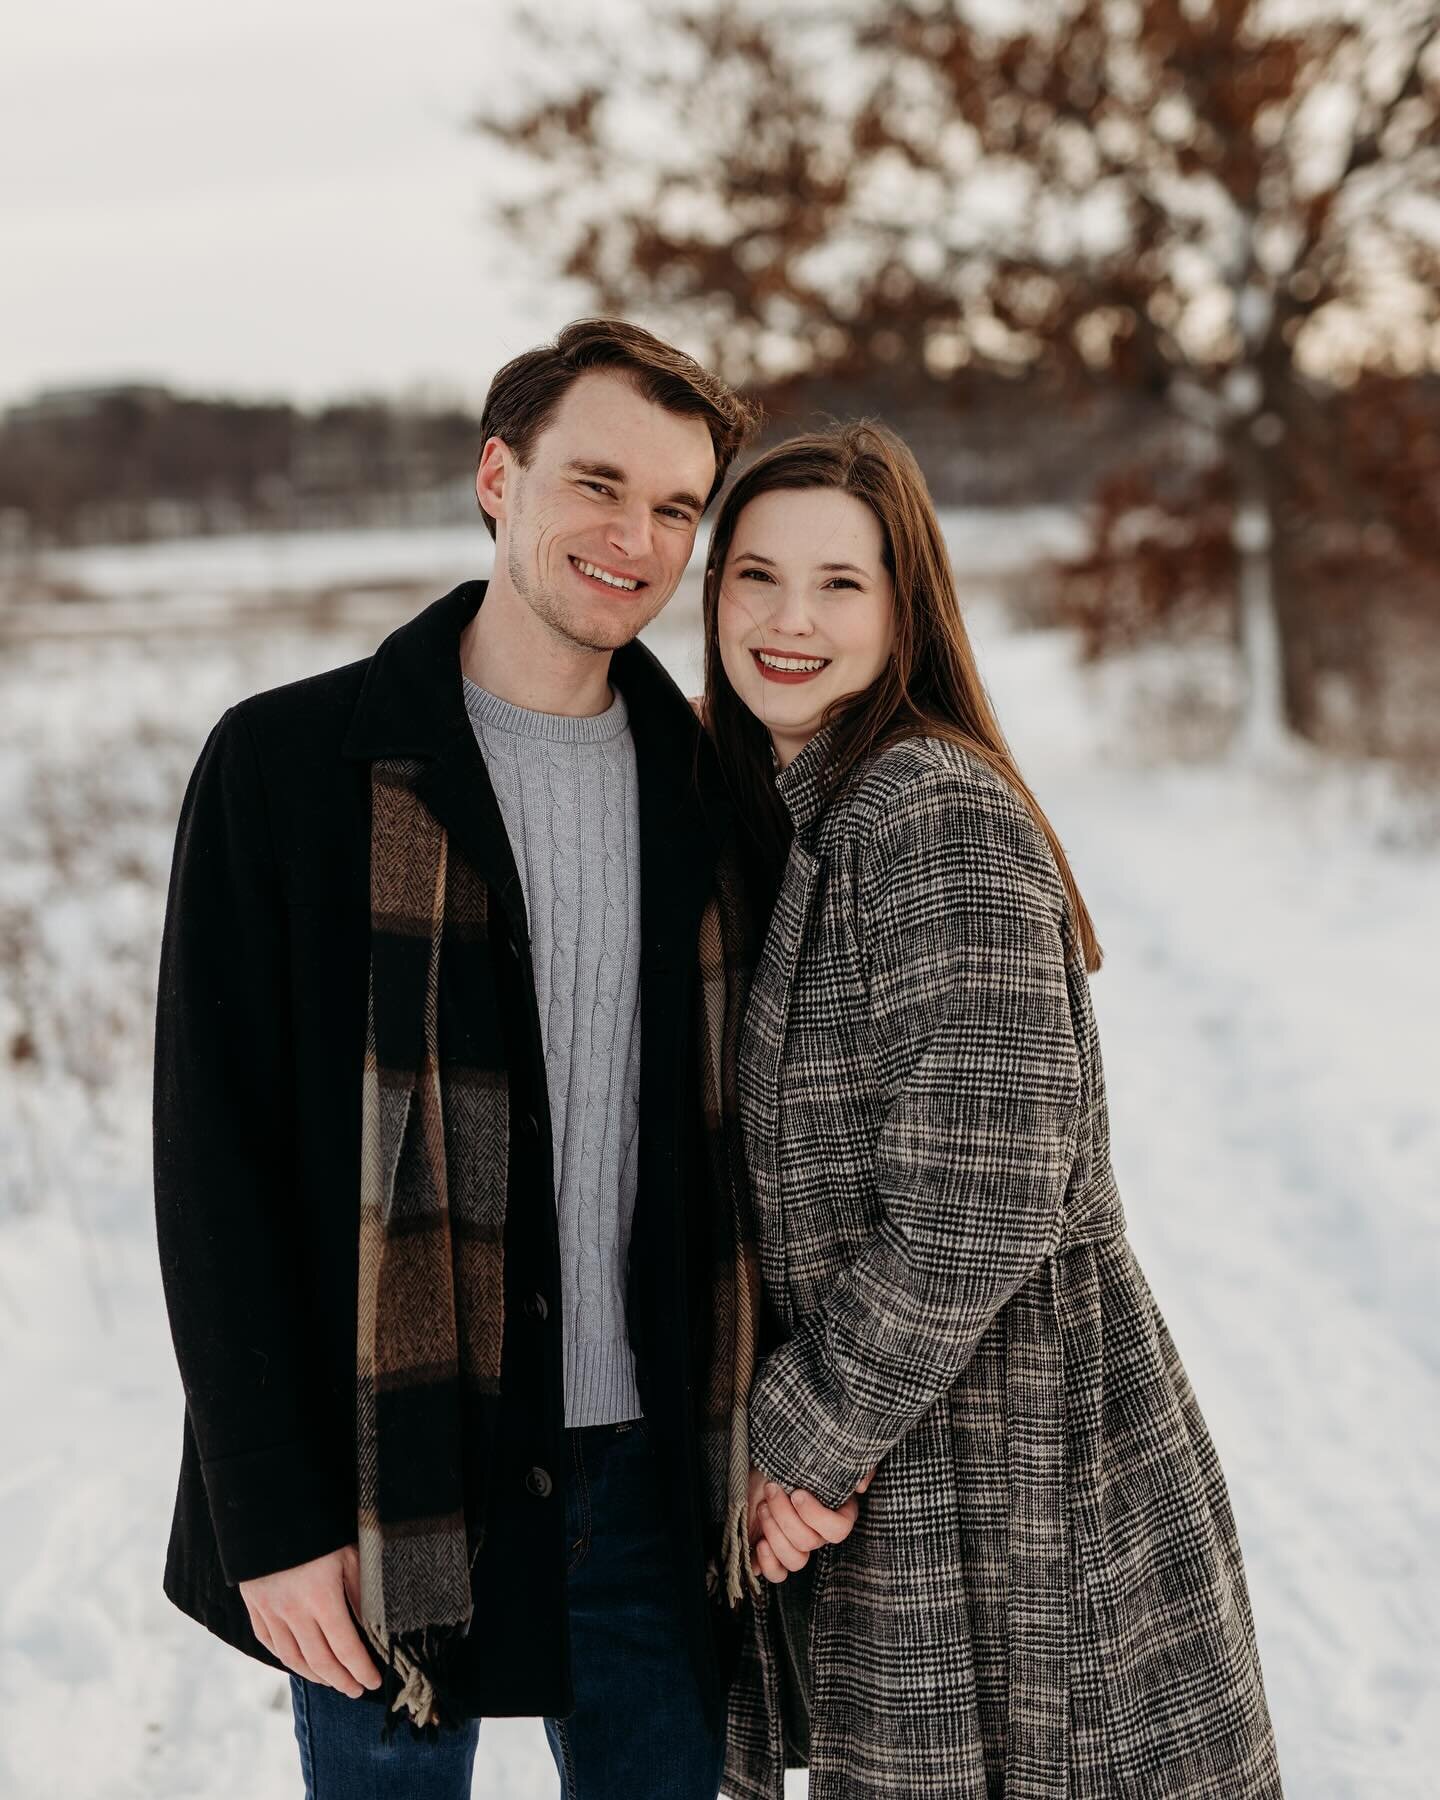 Did you know In addition to Families I also do couples or engagements!! 
+ 
Www.appledapples.com 
+
#milwaukeephotographer #mukwoangophotographer #couplesphotography #localphotographer #muskegowiphotographer